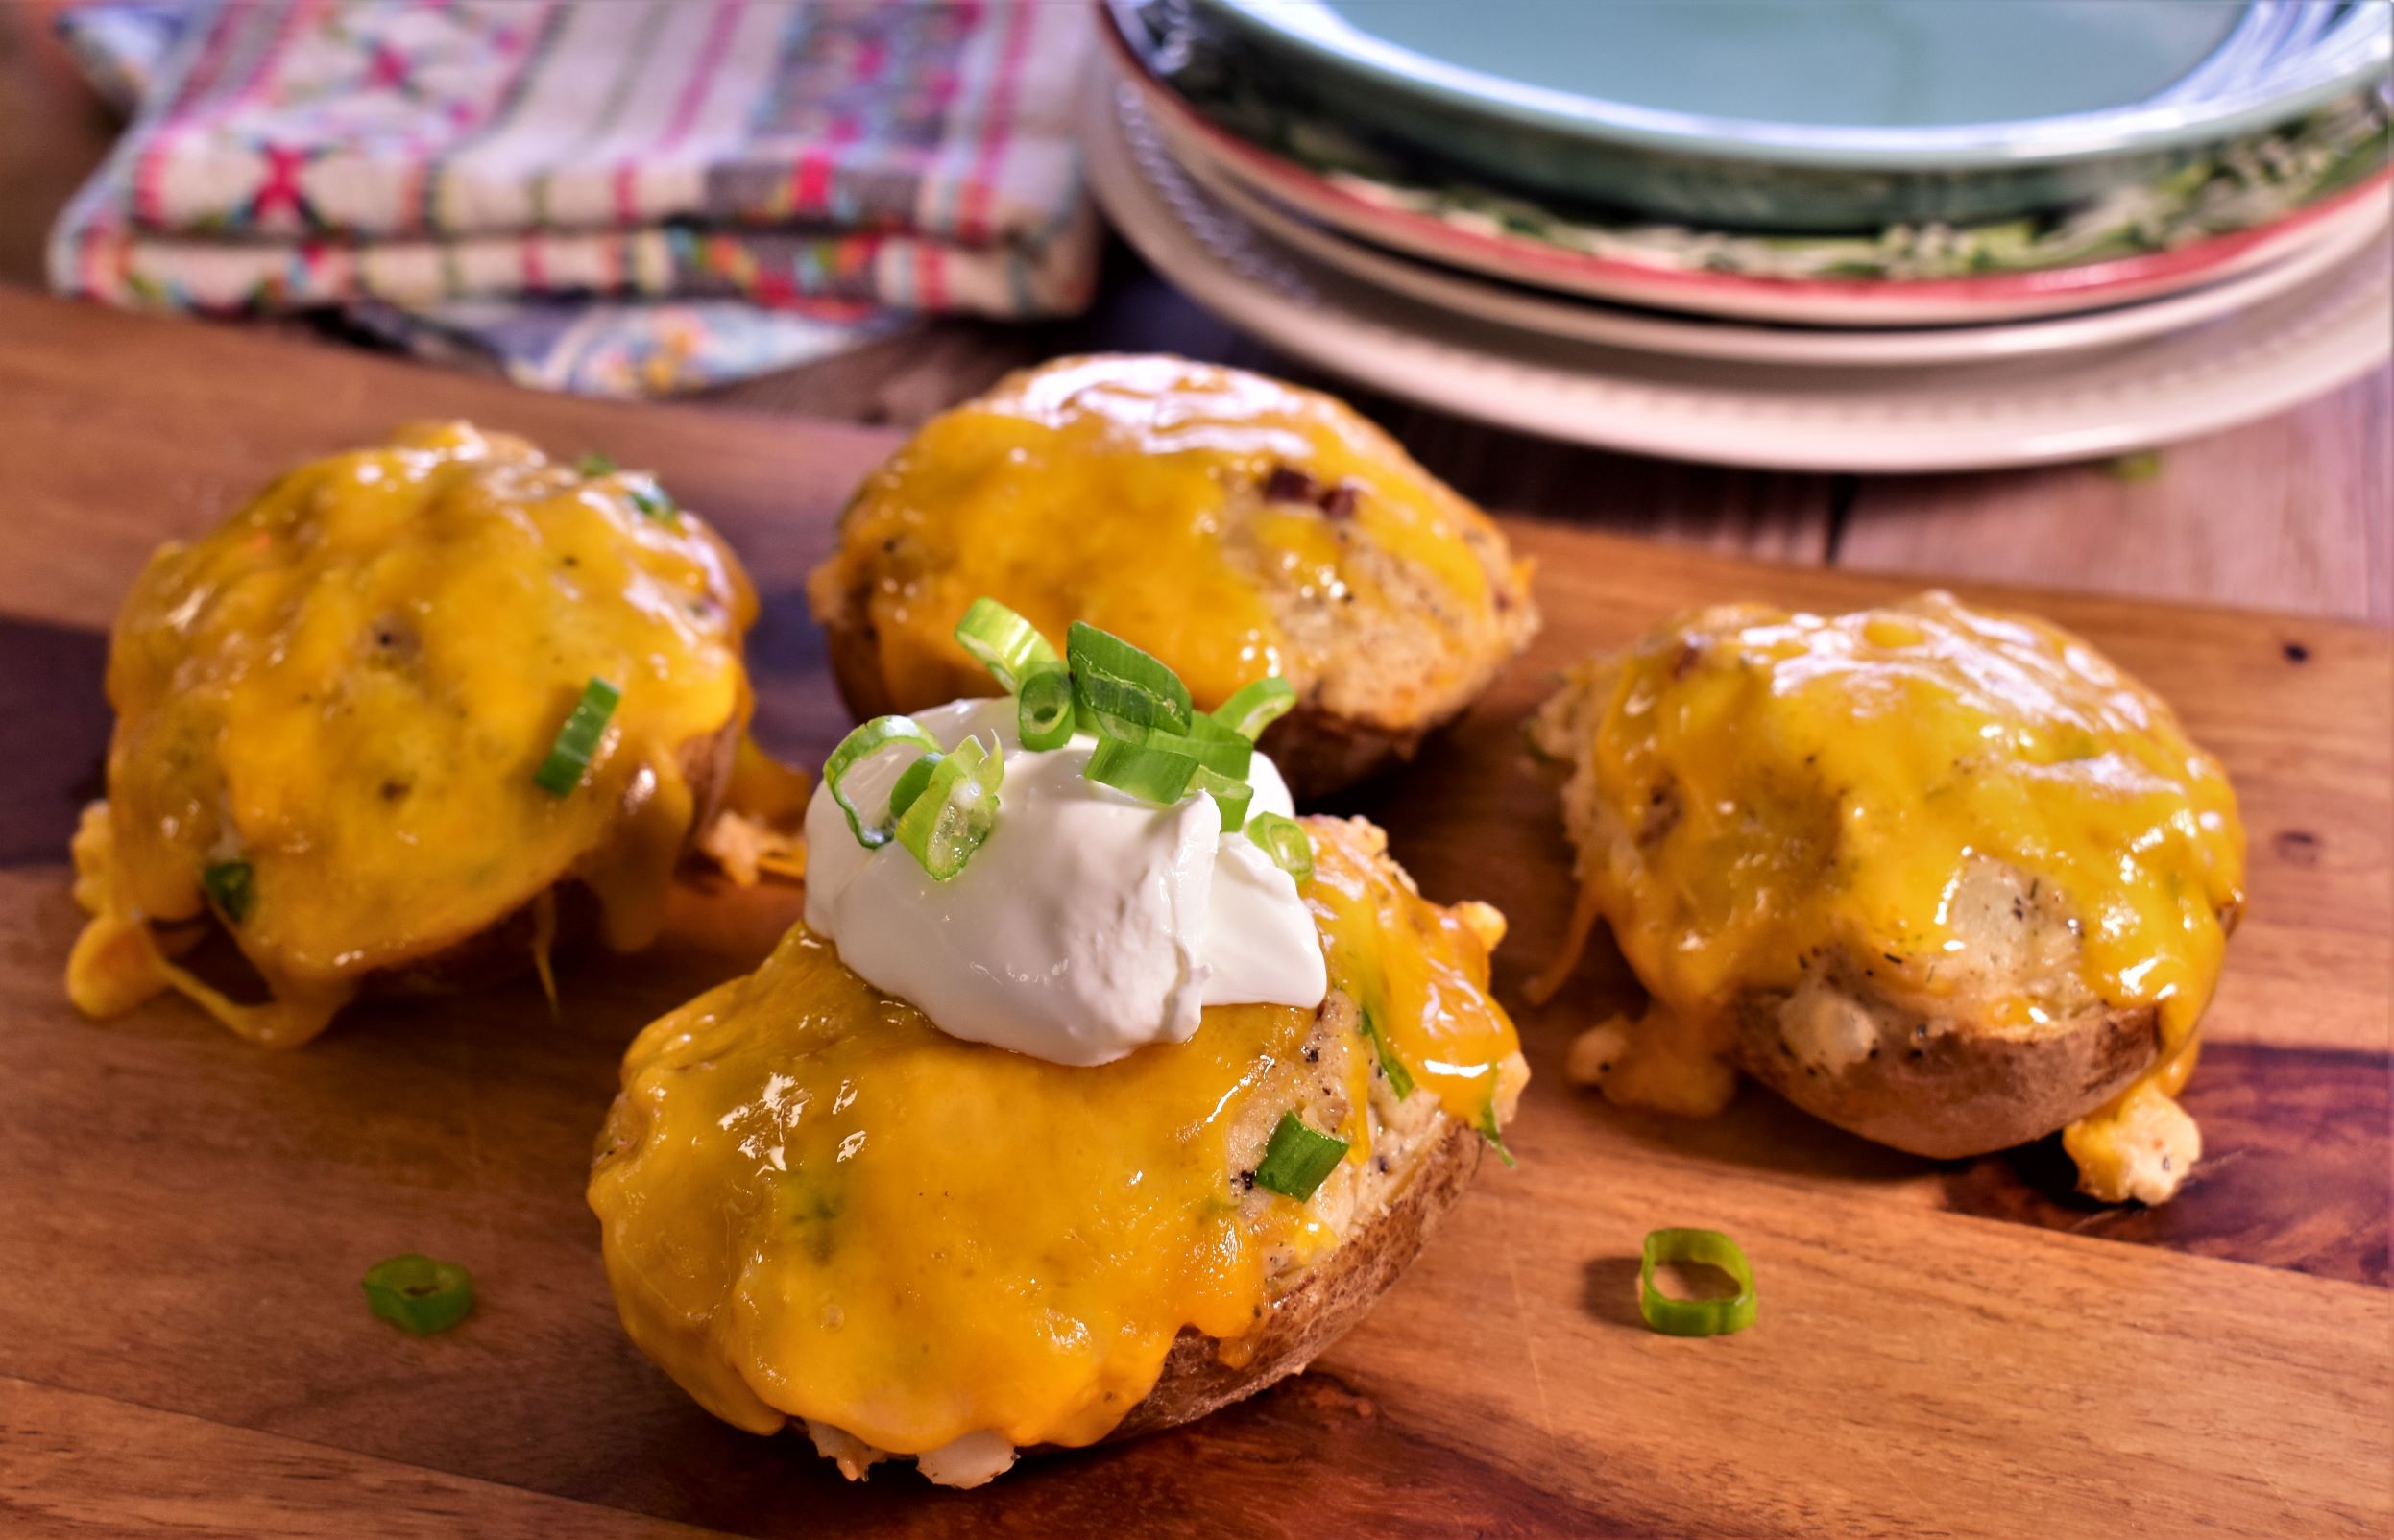 4 twice baked potatoes topped with cheese, a dallop of sour cream and green onions